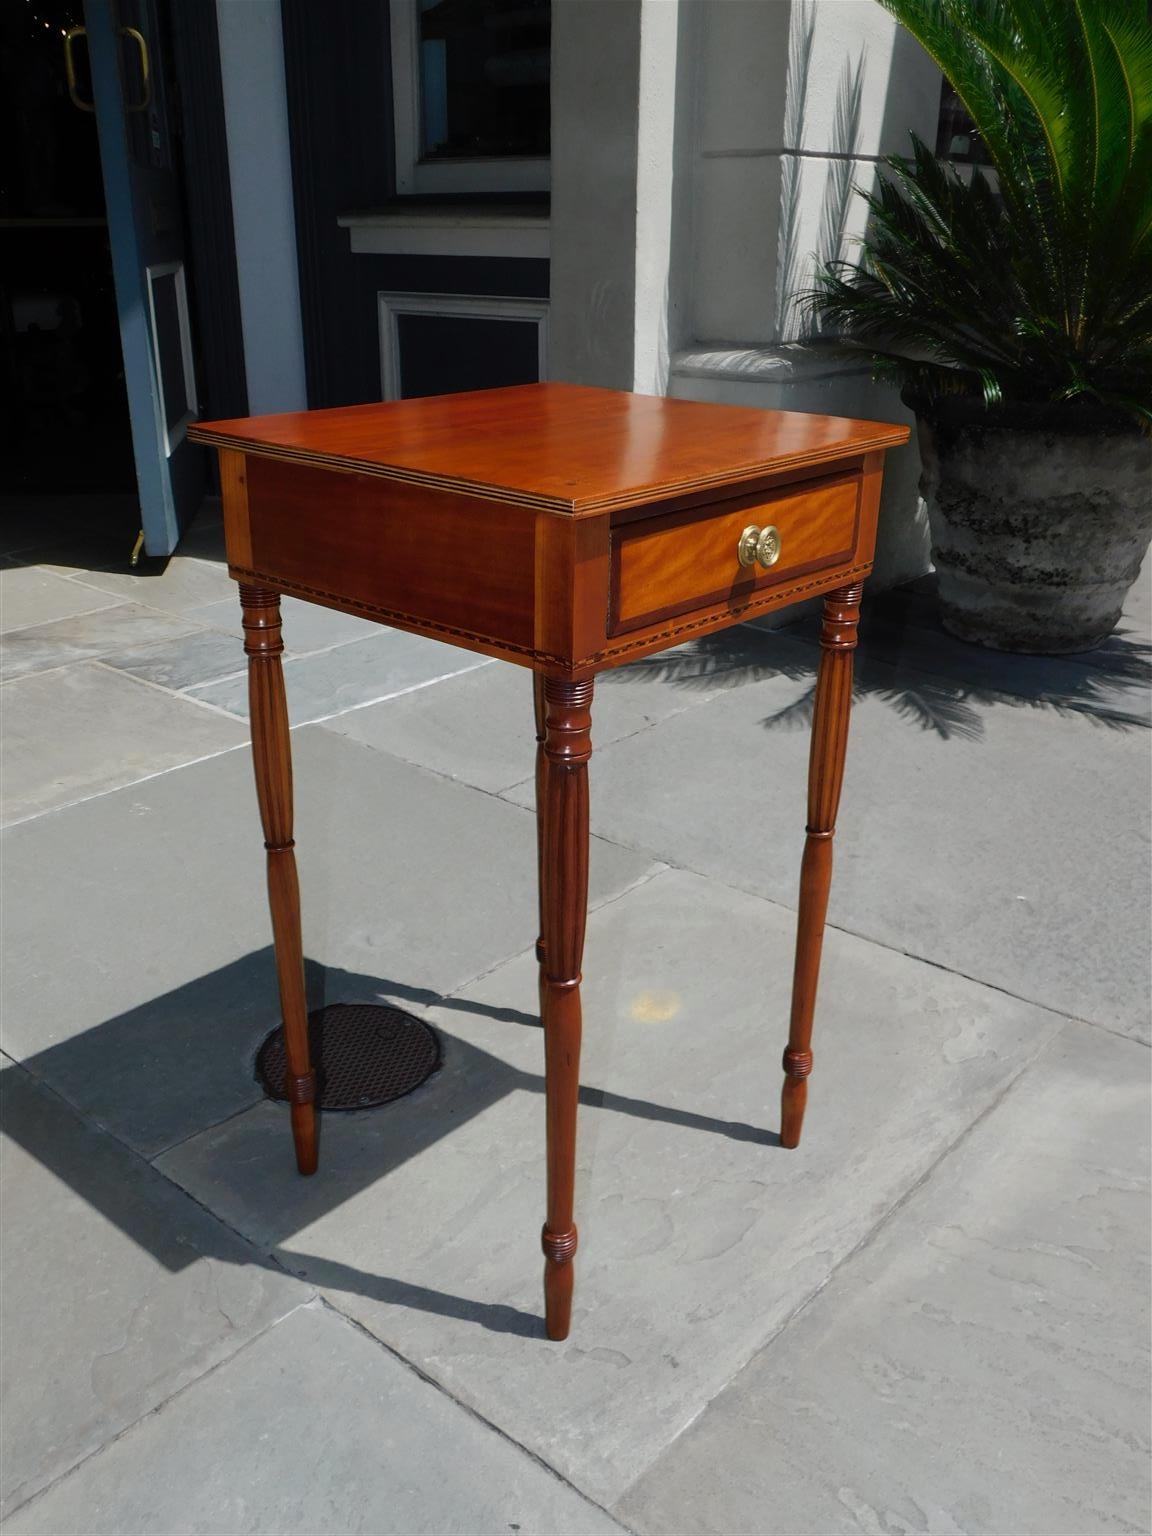 Hand-Carved American Cherry and Mahogany One Drawer Inlaid Stand with Reeded Legs, C. 1810